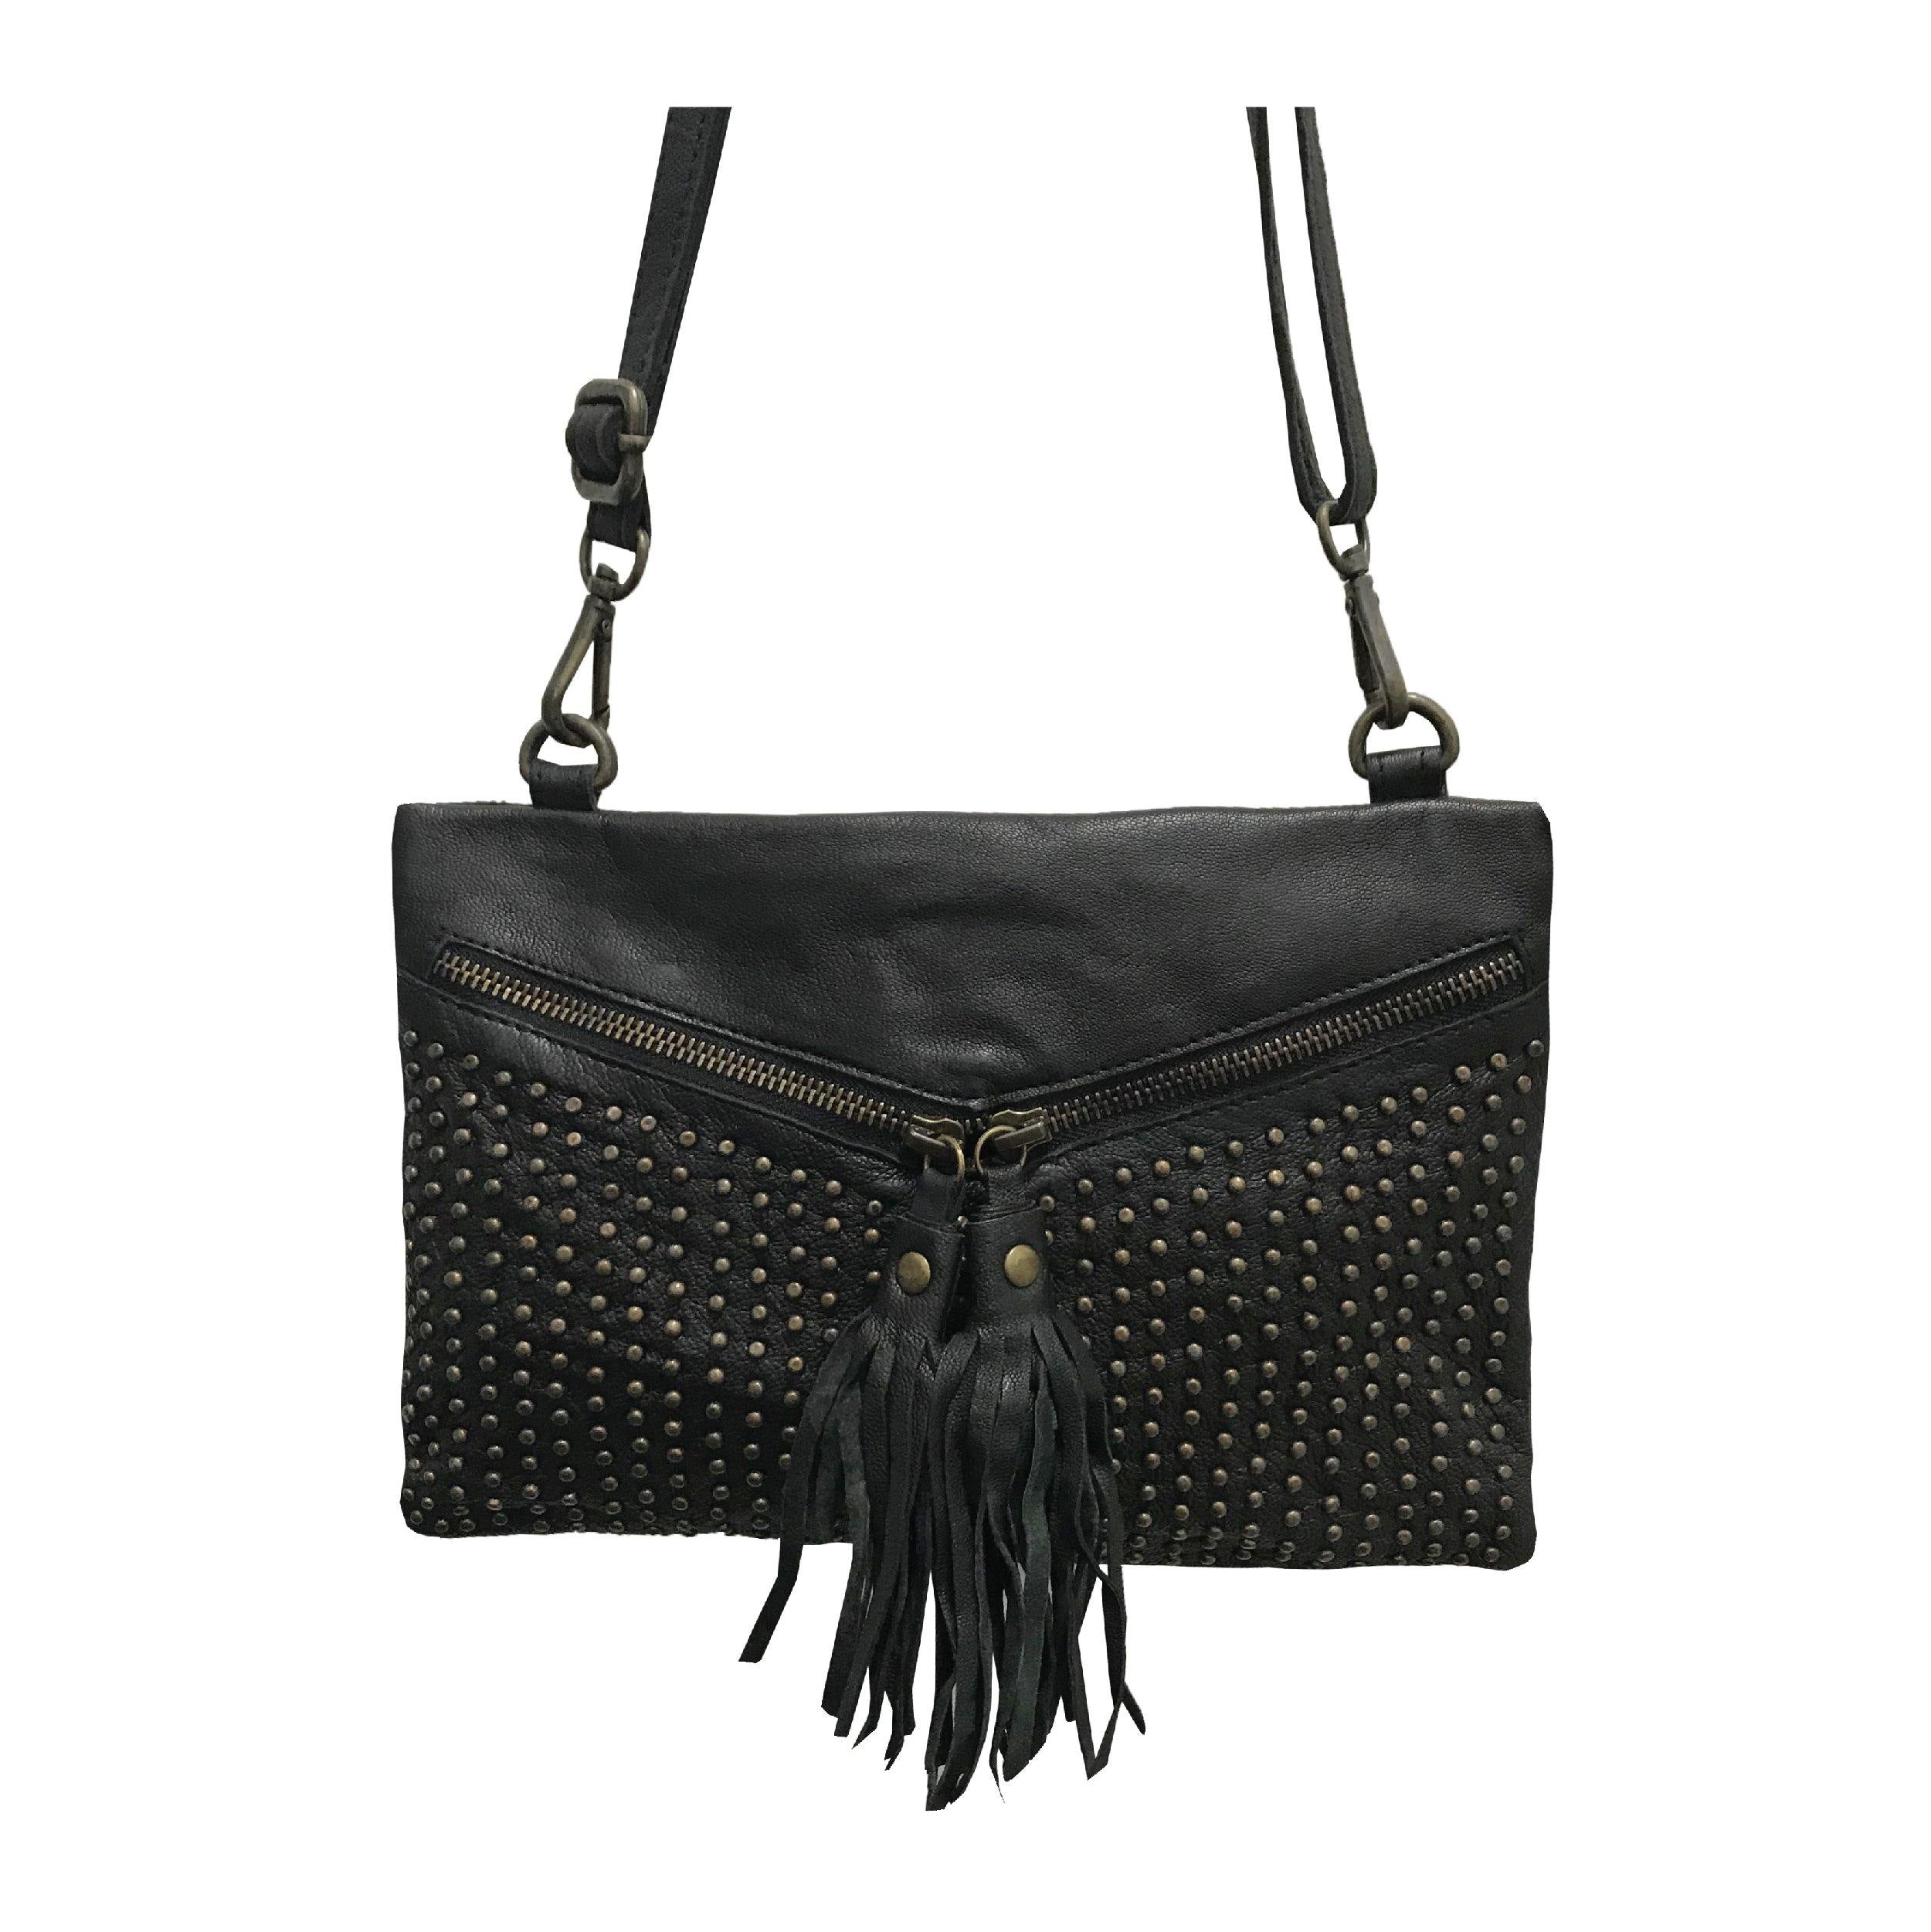 Leather Crossbody Jayde Black Picture 1 regular from Cadelle Leather